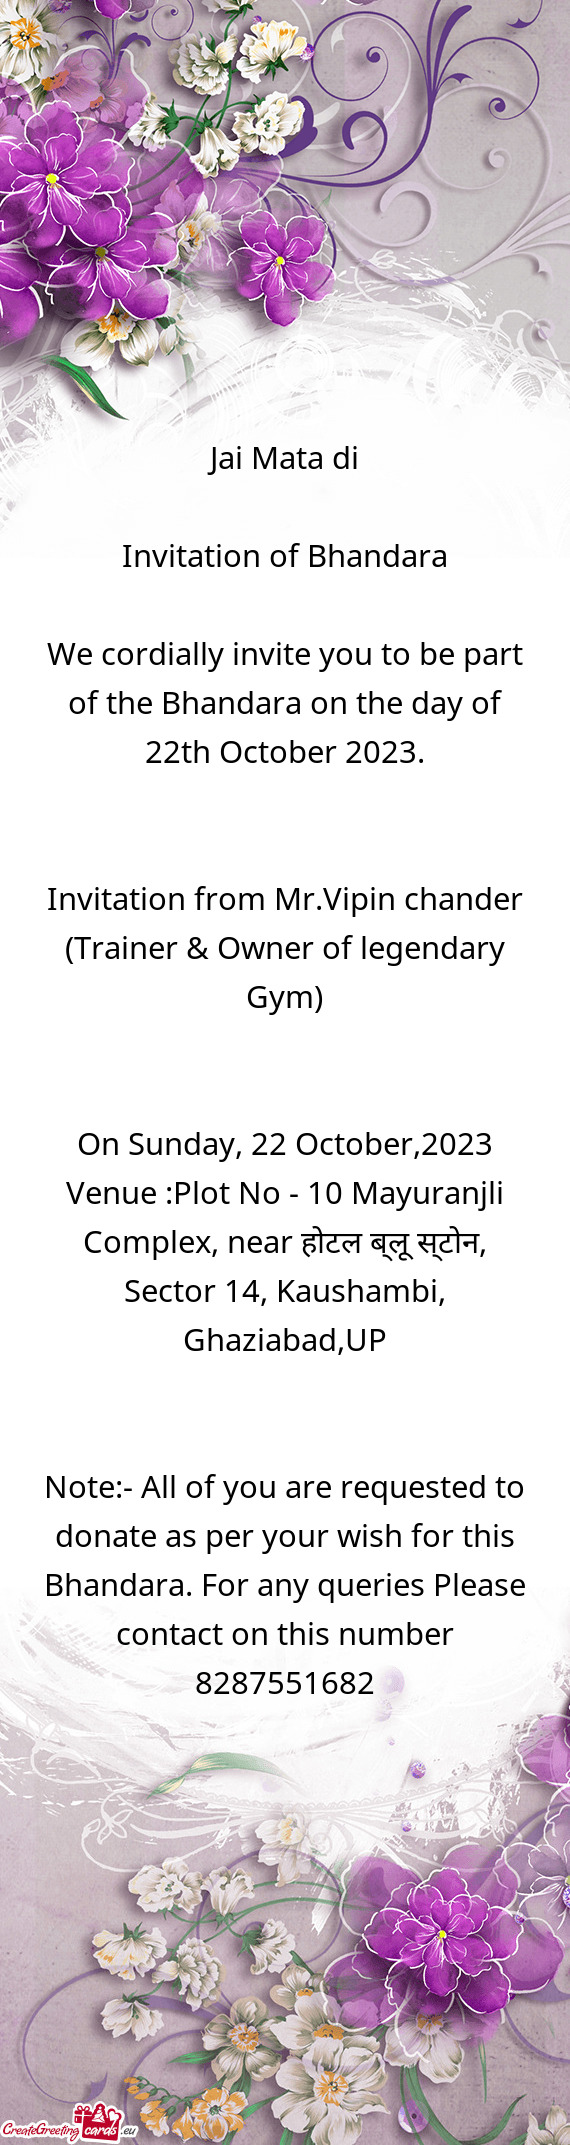 Invitation from Mr.Vipin chander (Trainer & Owner of legendary Gym)